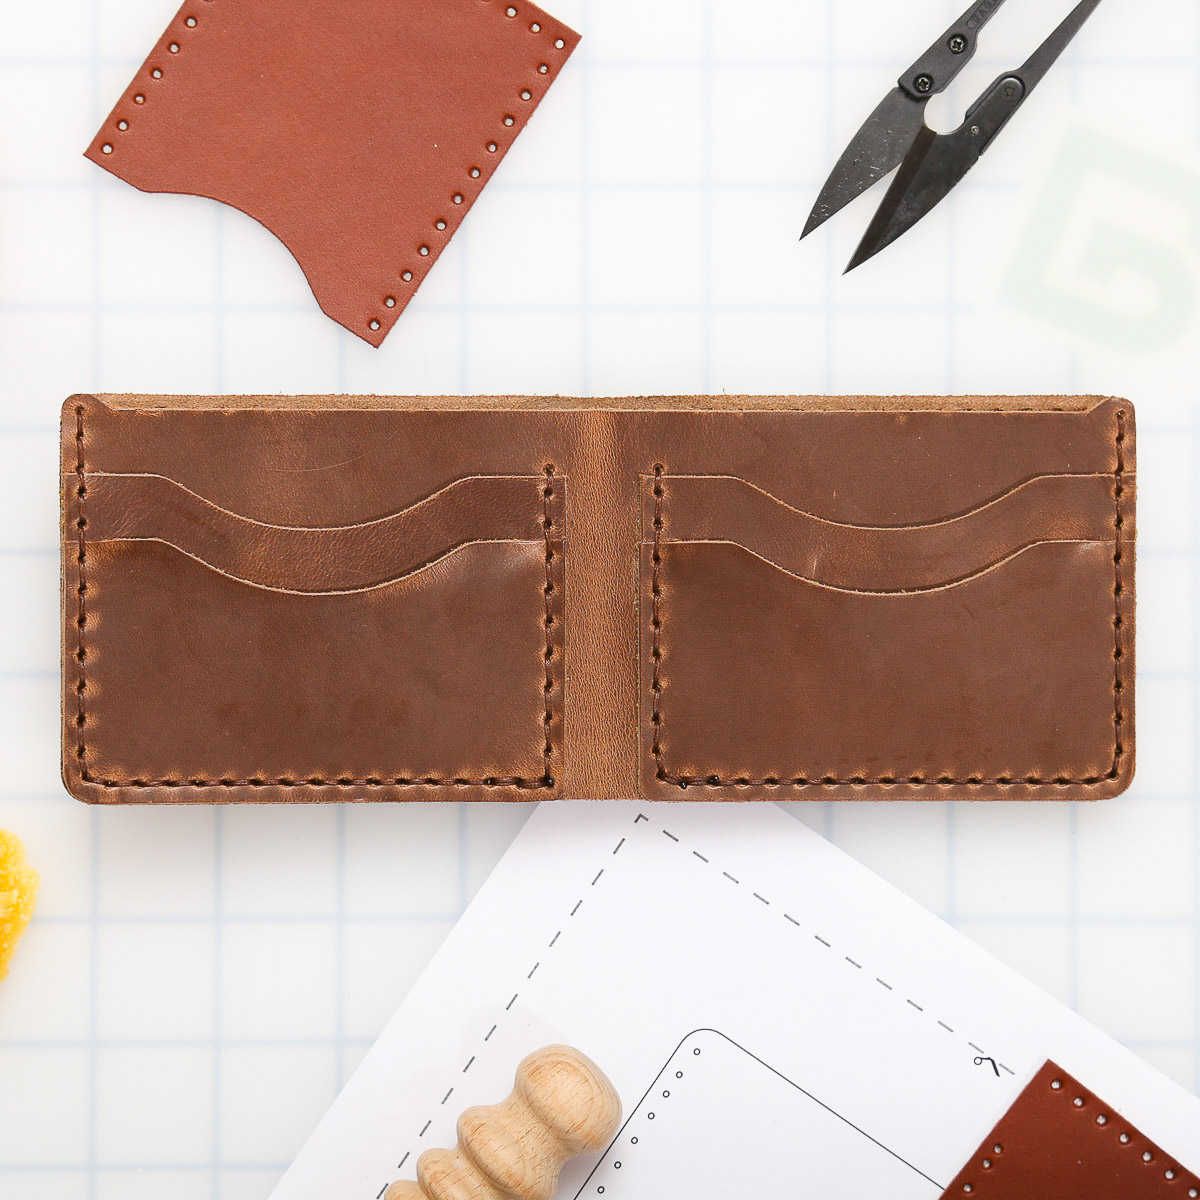 DIY Leather Wallet Kit  Make Your Own Wallet – POPSEWING®